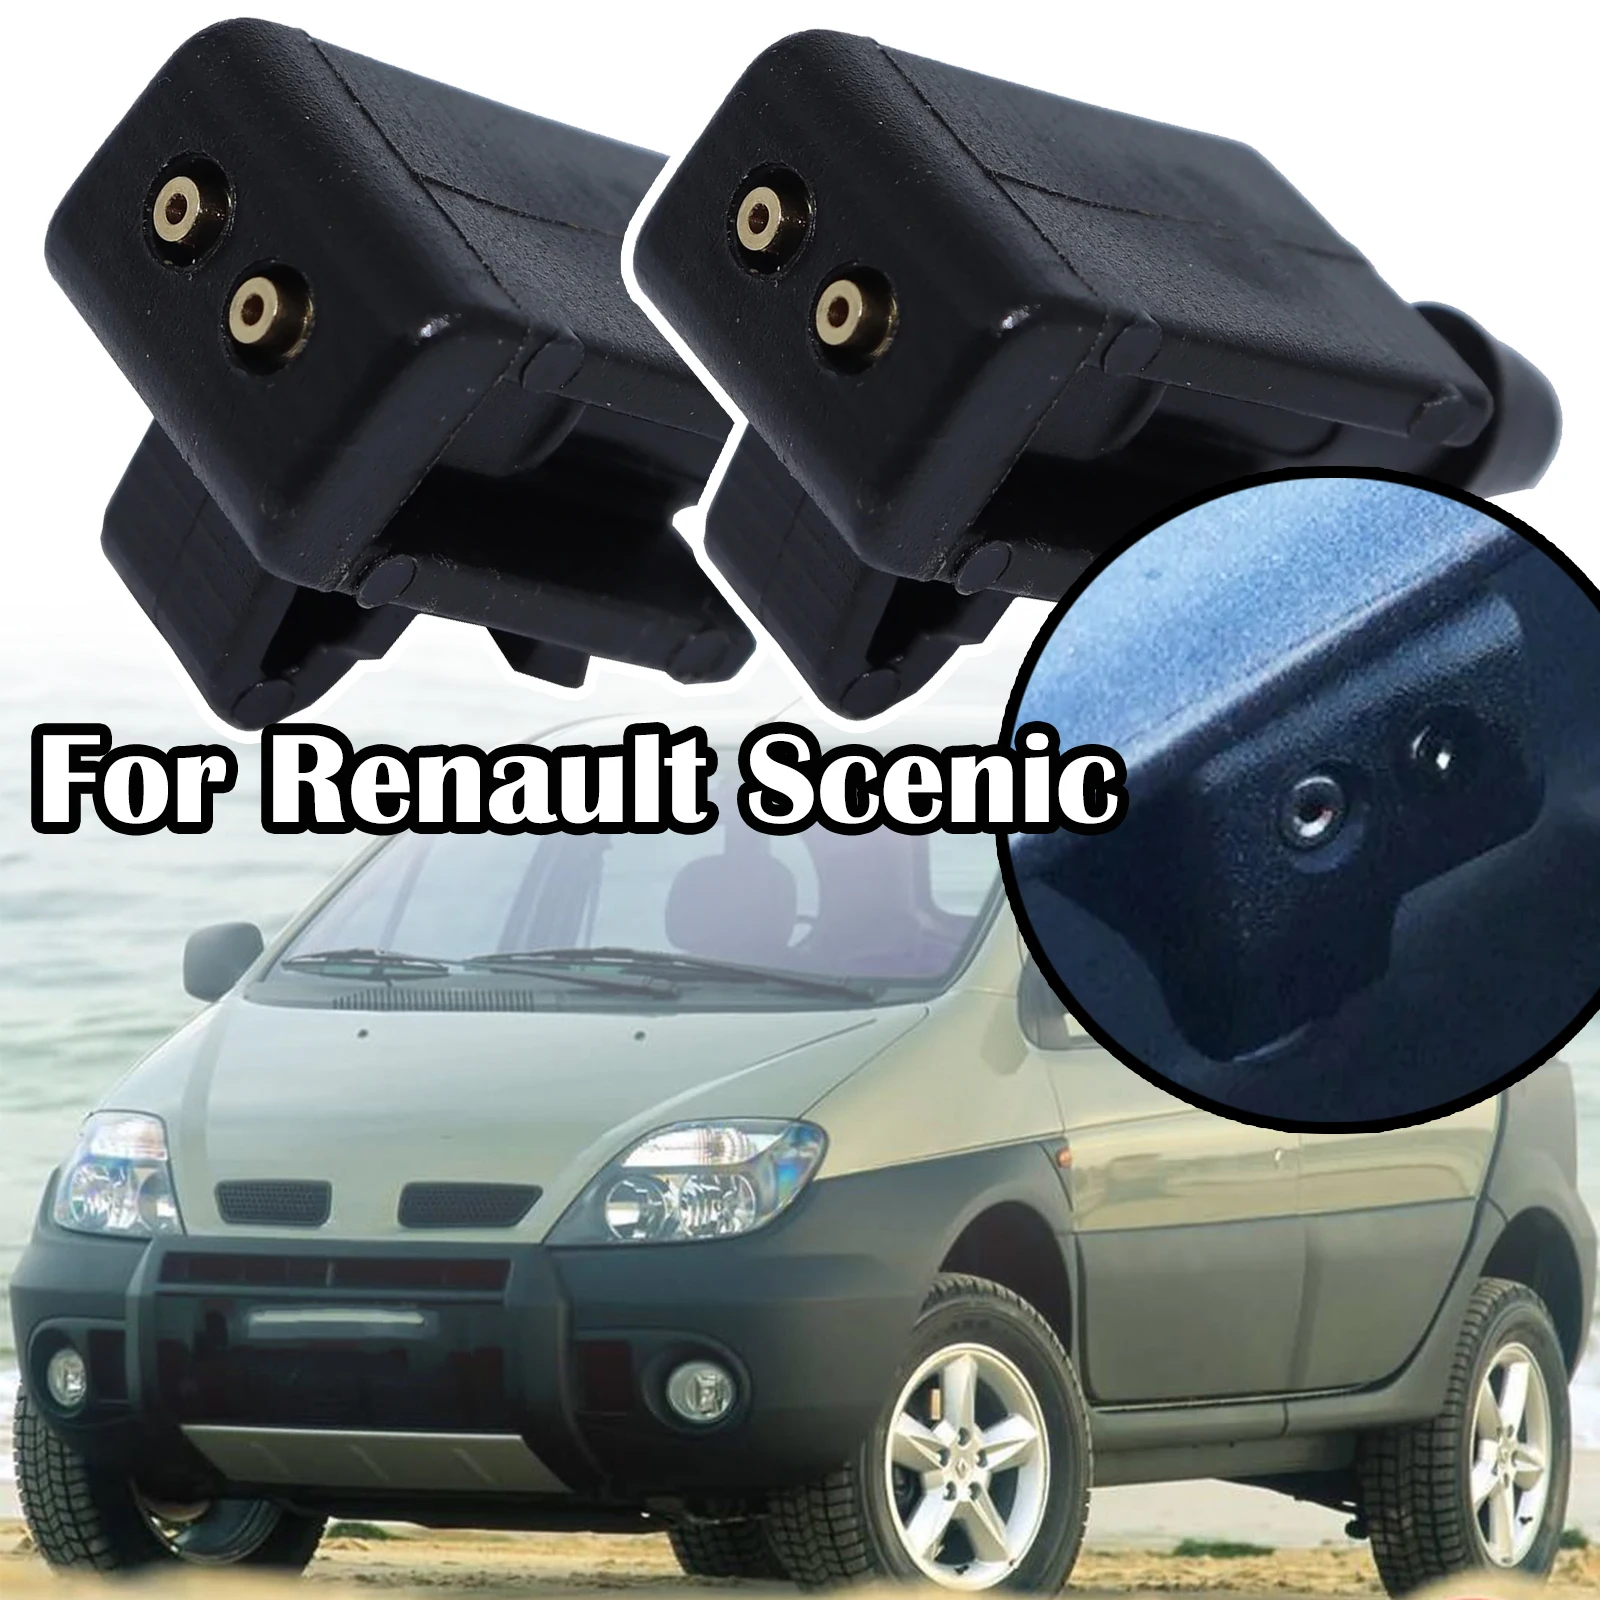 

2x For Renault Scenic 2 MK2 Laguna 3 Mk3 2007 - 2015 Fluence Front Windscreen Wiper Window Washer Jet Nozzle Spray Replacement